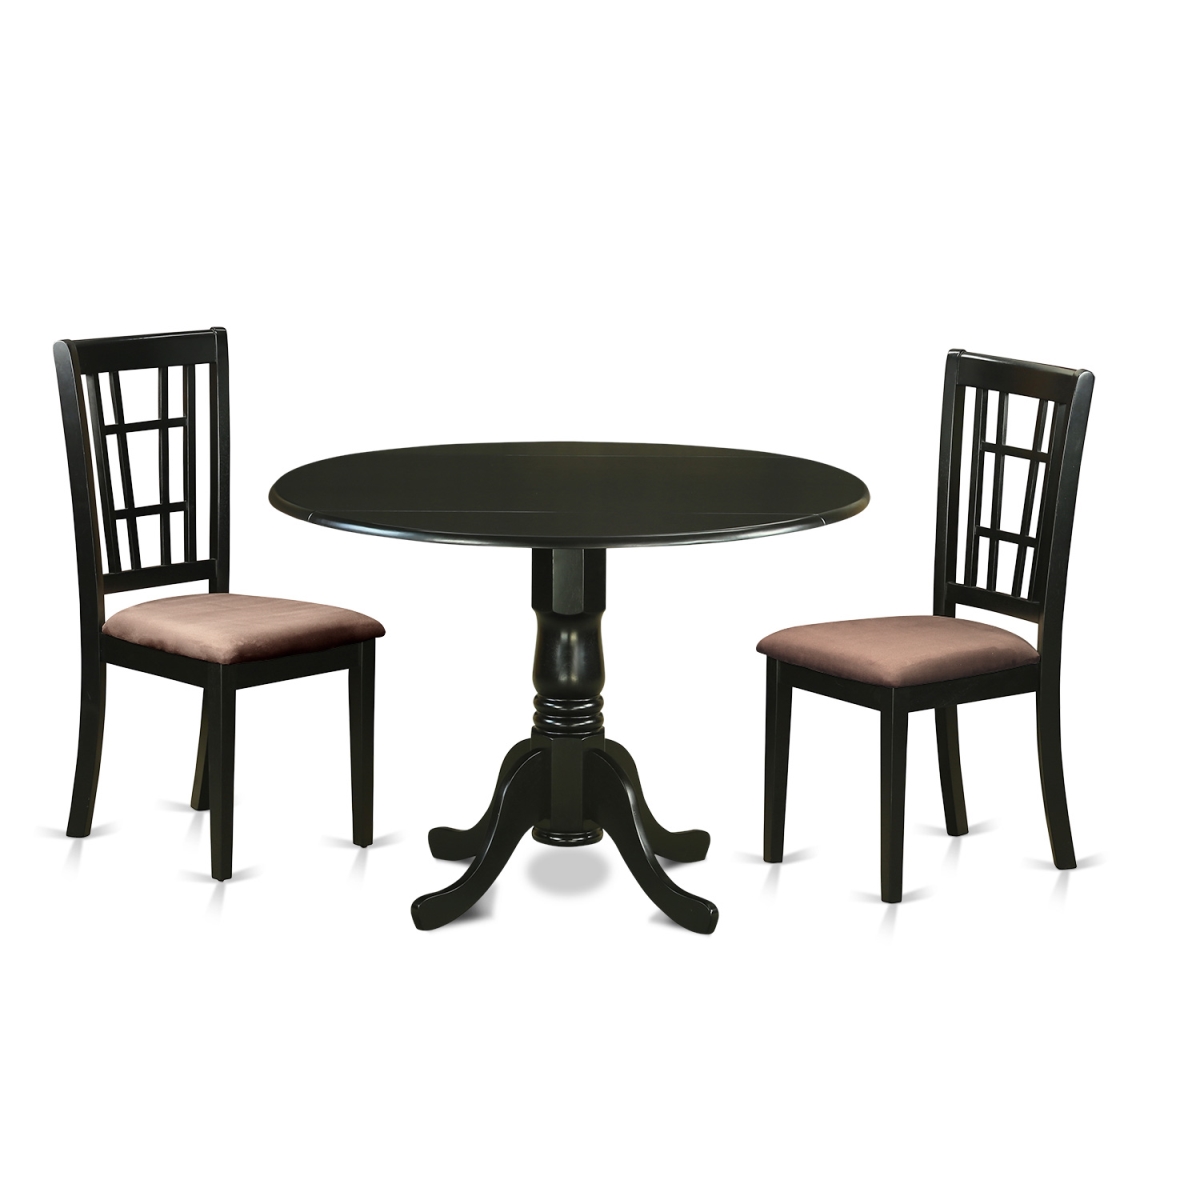 Picture of East West Furniture DLNI3-BLK-C Table Set with 2 Table & 2 Chairs, Black - 3 Piece